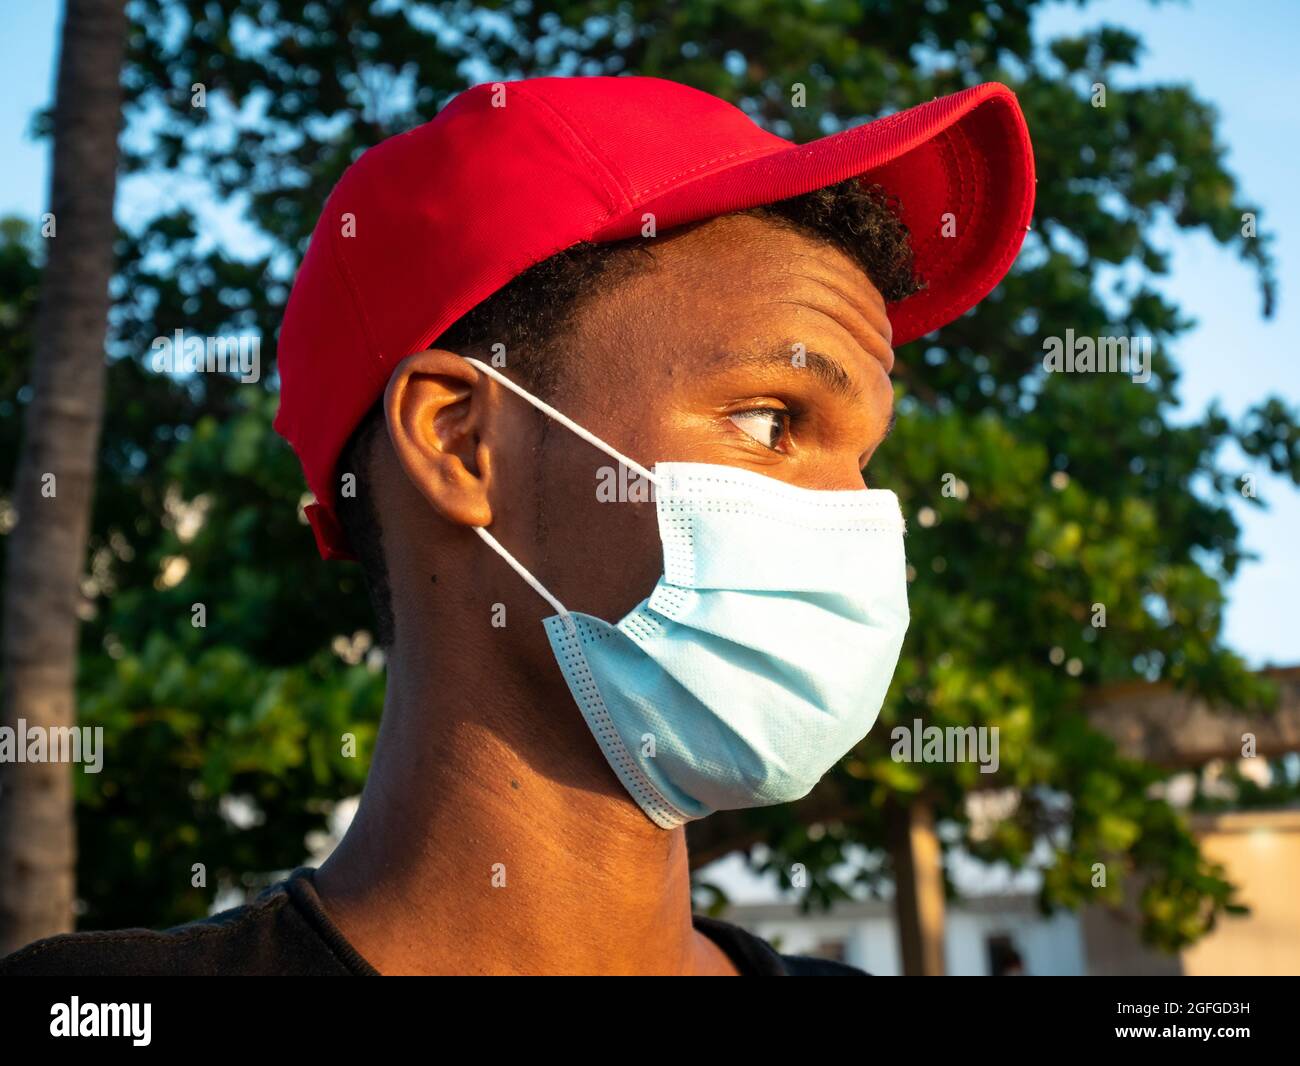 Riohacha, La Guajira, Colombia - May 26 2021: Portrait of a Young Latin Man with a Red Cap and a Protective Mask is  Looking at the Sunset with Trees Stock Photo